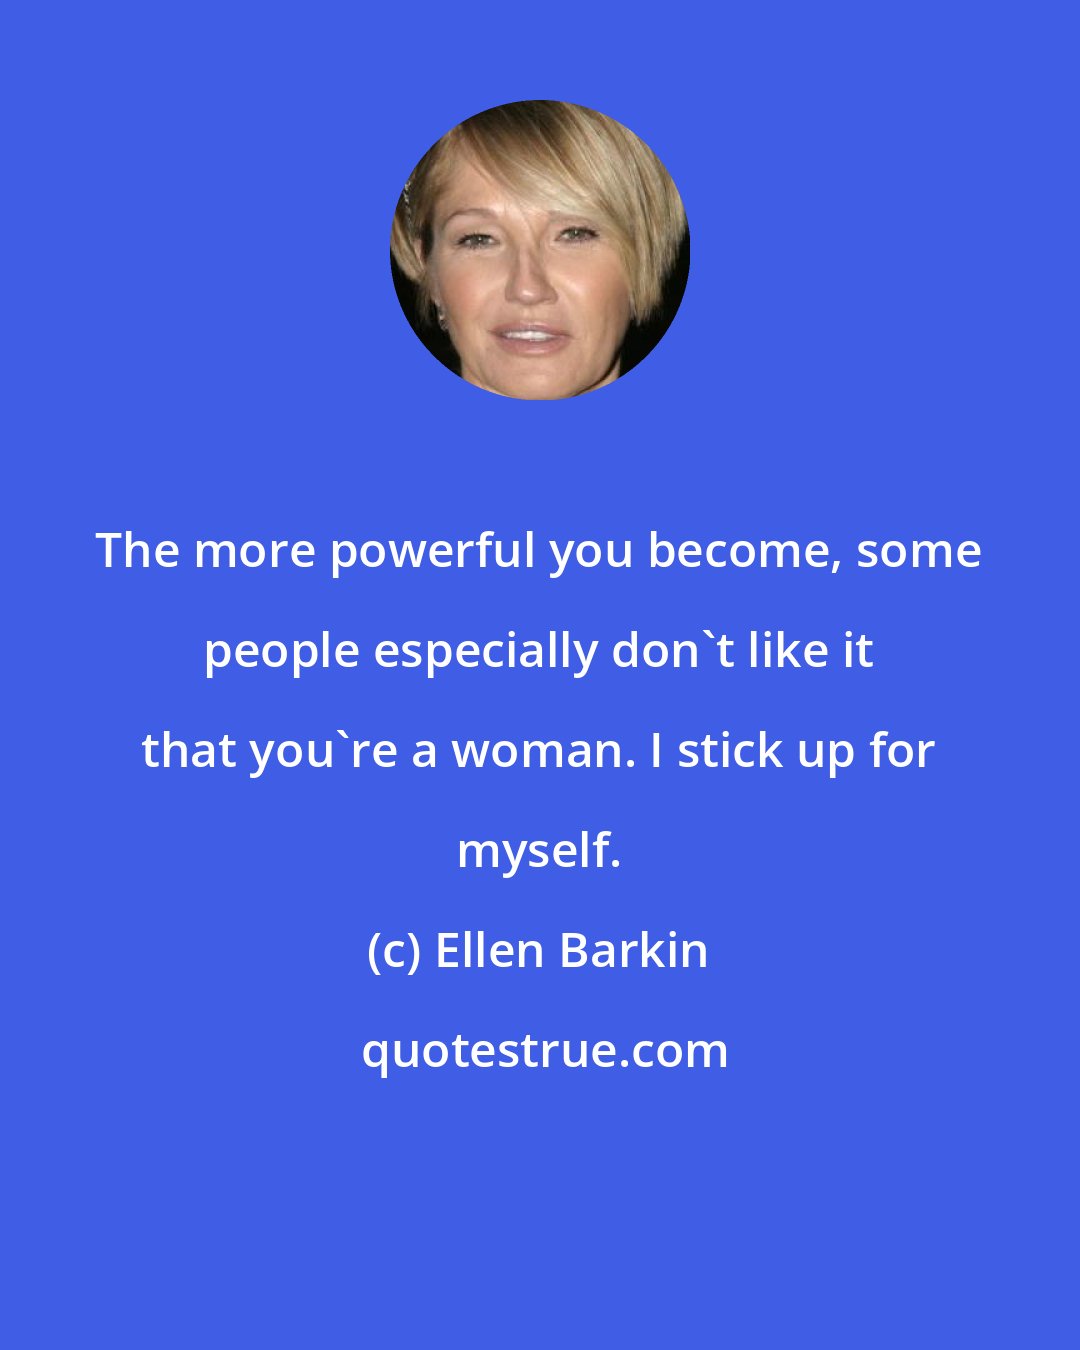 Ellen Barkin: The more powerful you become, some people especially don't like it that you're a woman. I stick up for myself.